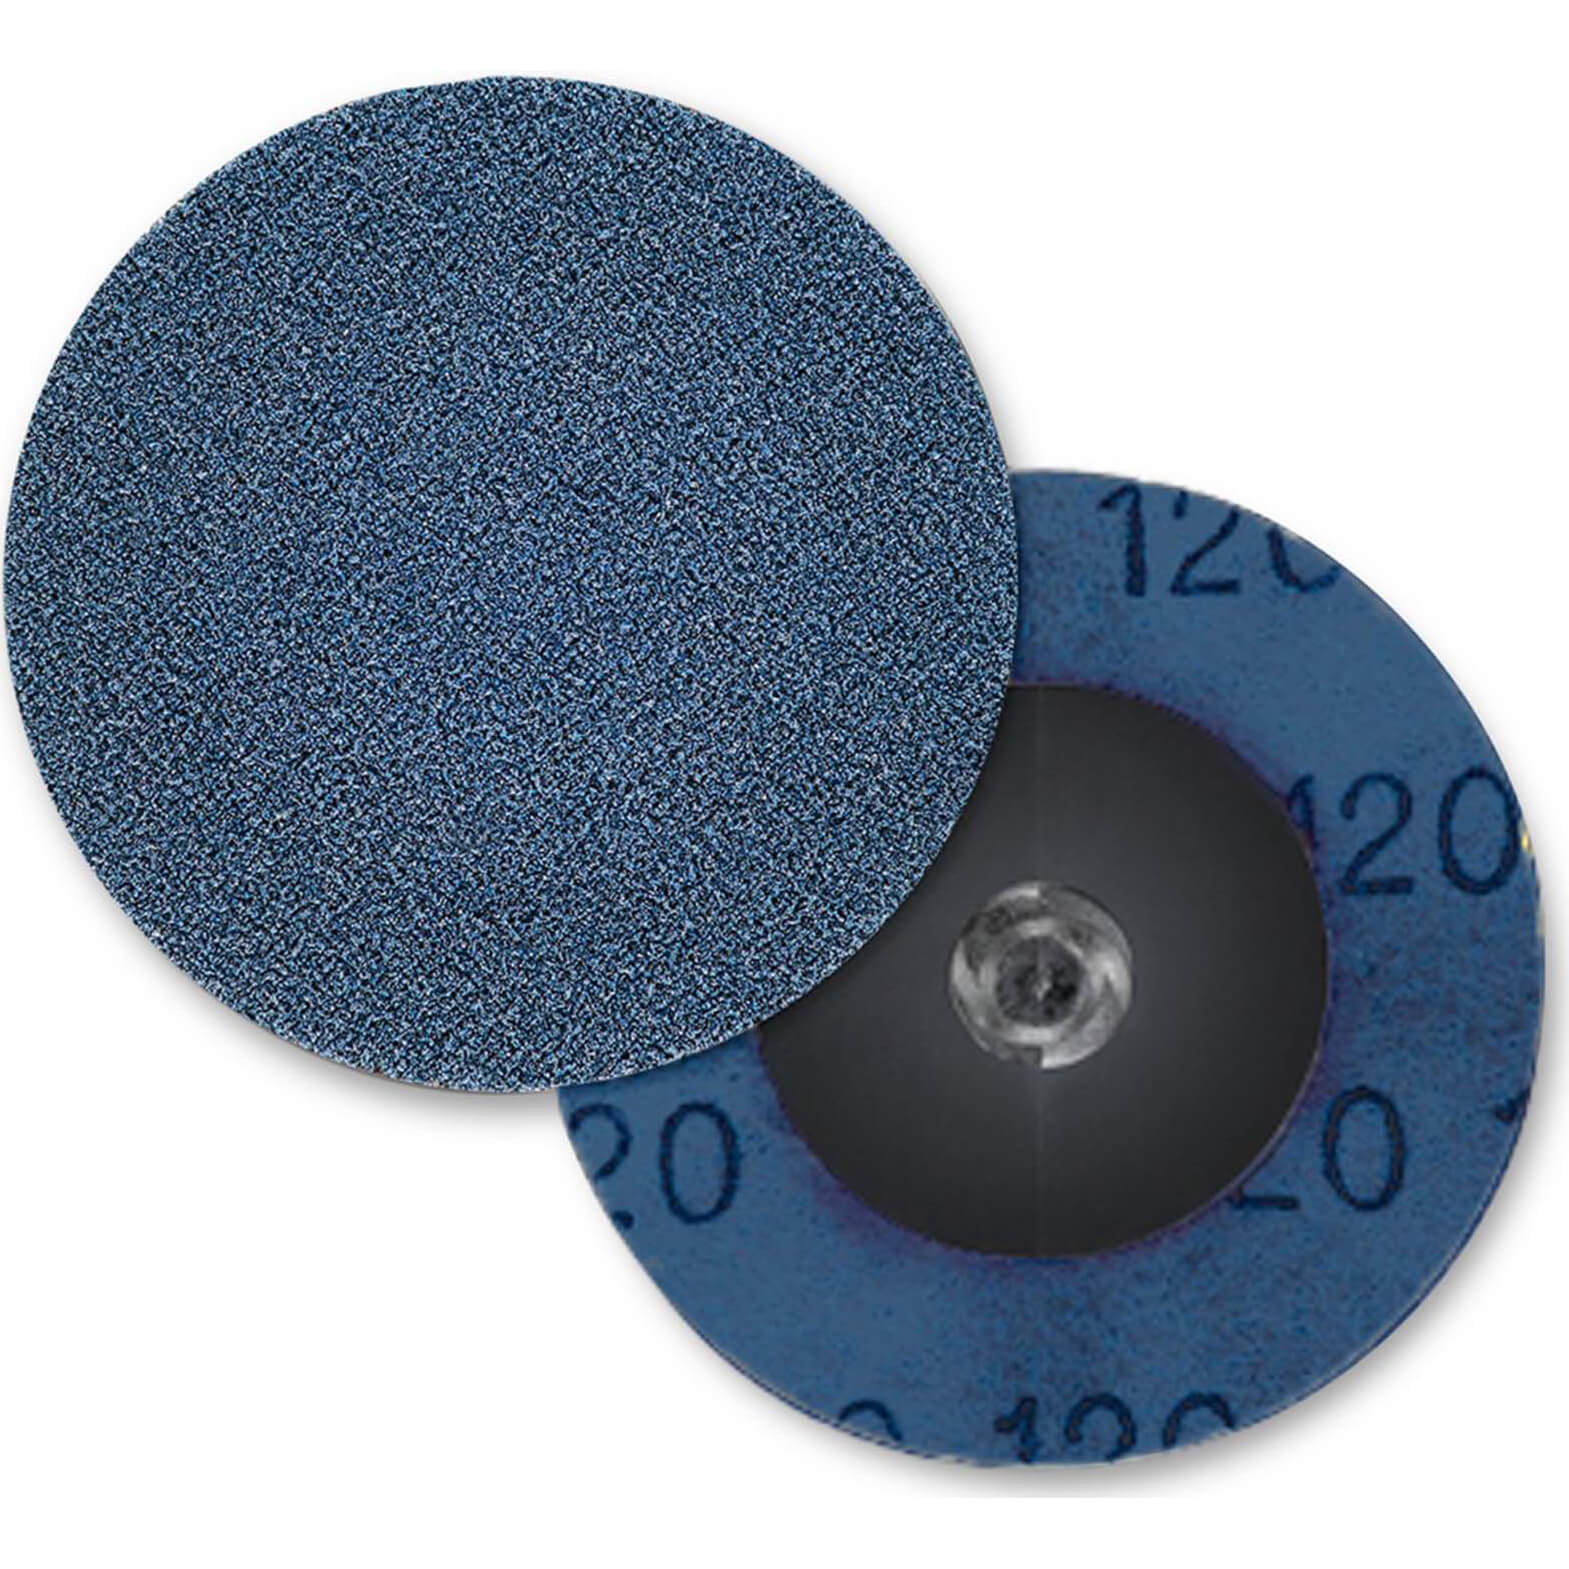 Image of Sia 2820 Siamet X Quick Change Abrasives Discs 50mm 320g Pack of 1